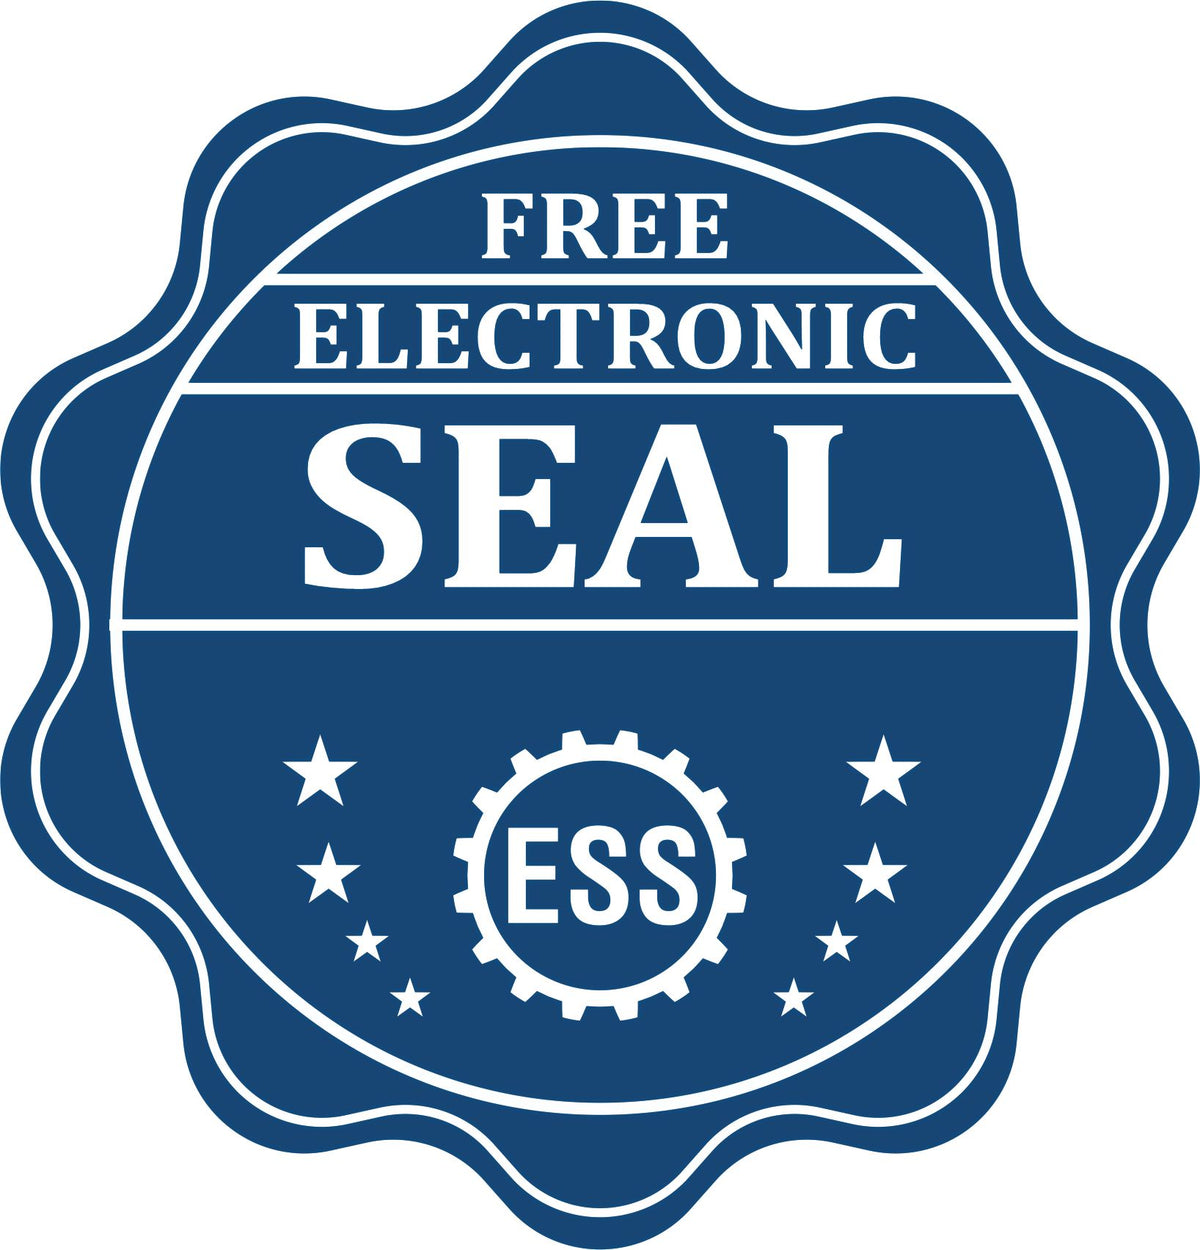 A badge showing a free electronic seal for the New Hampshire Geologist Desk Seal with stars and the ESS gear on the emblem.